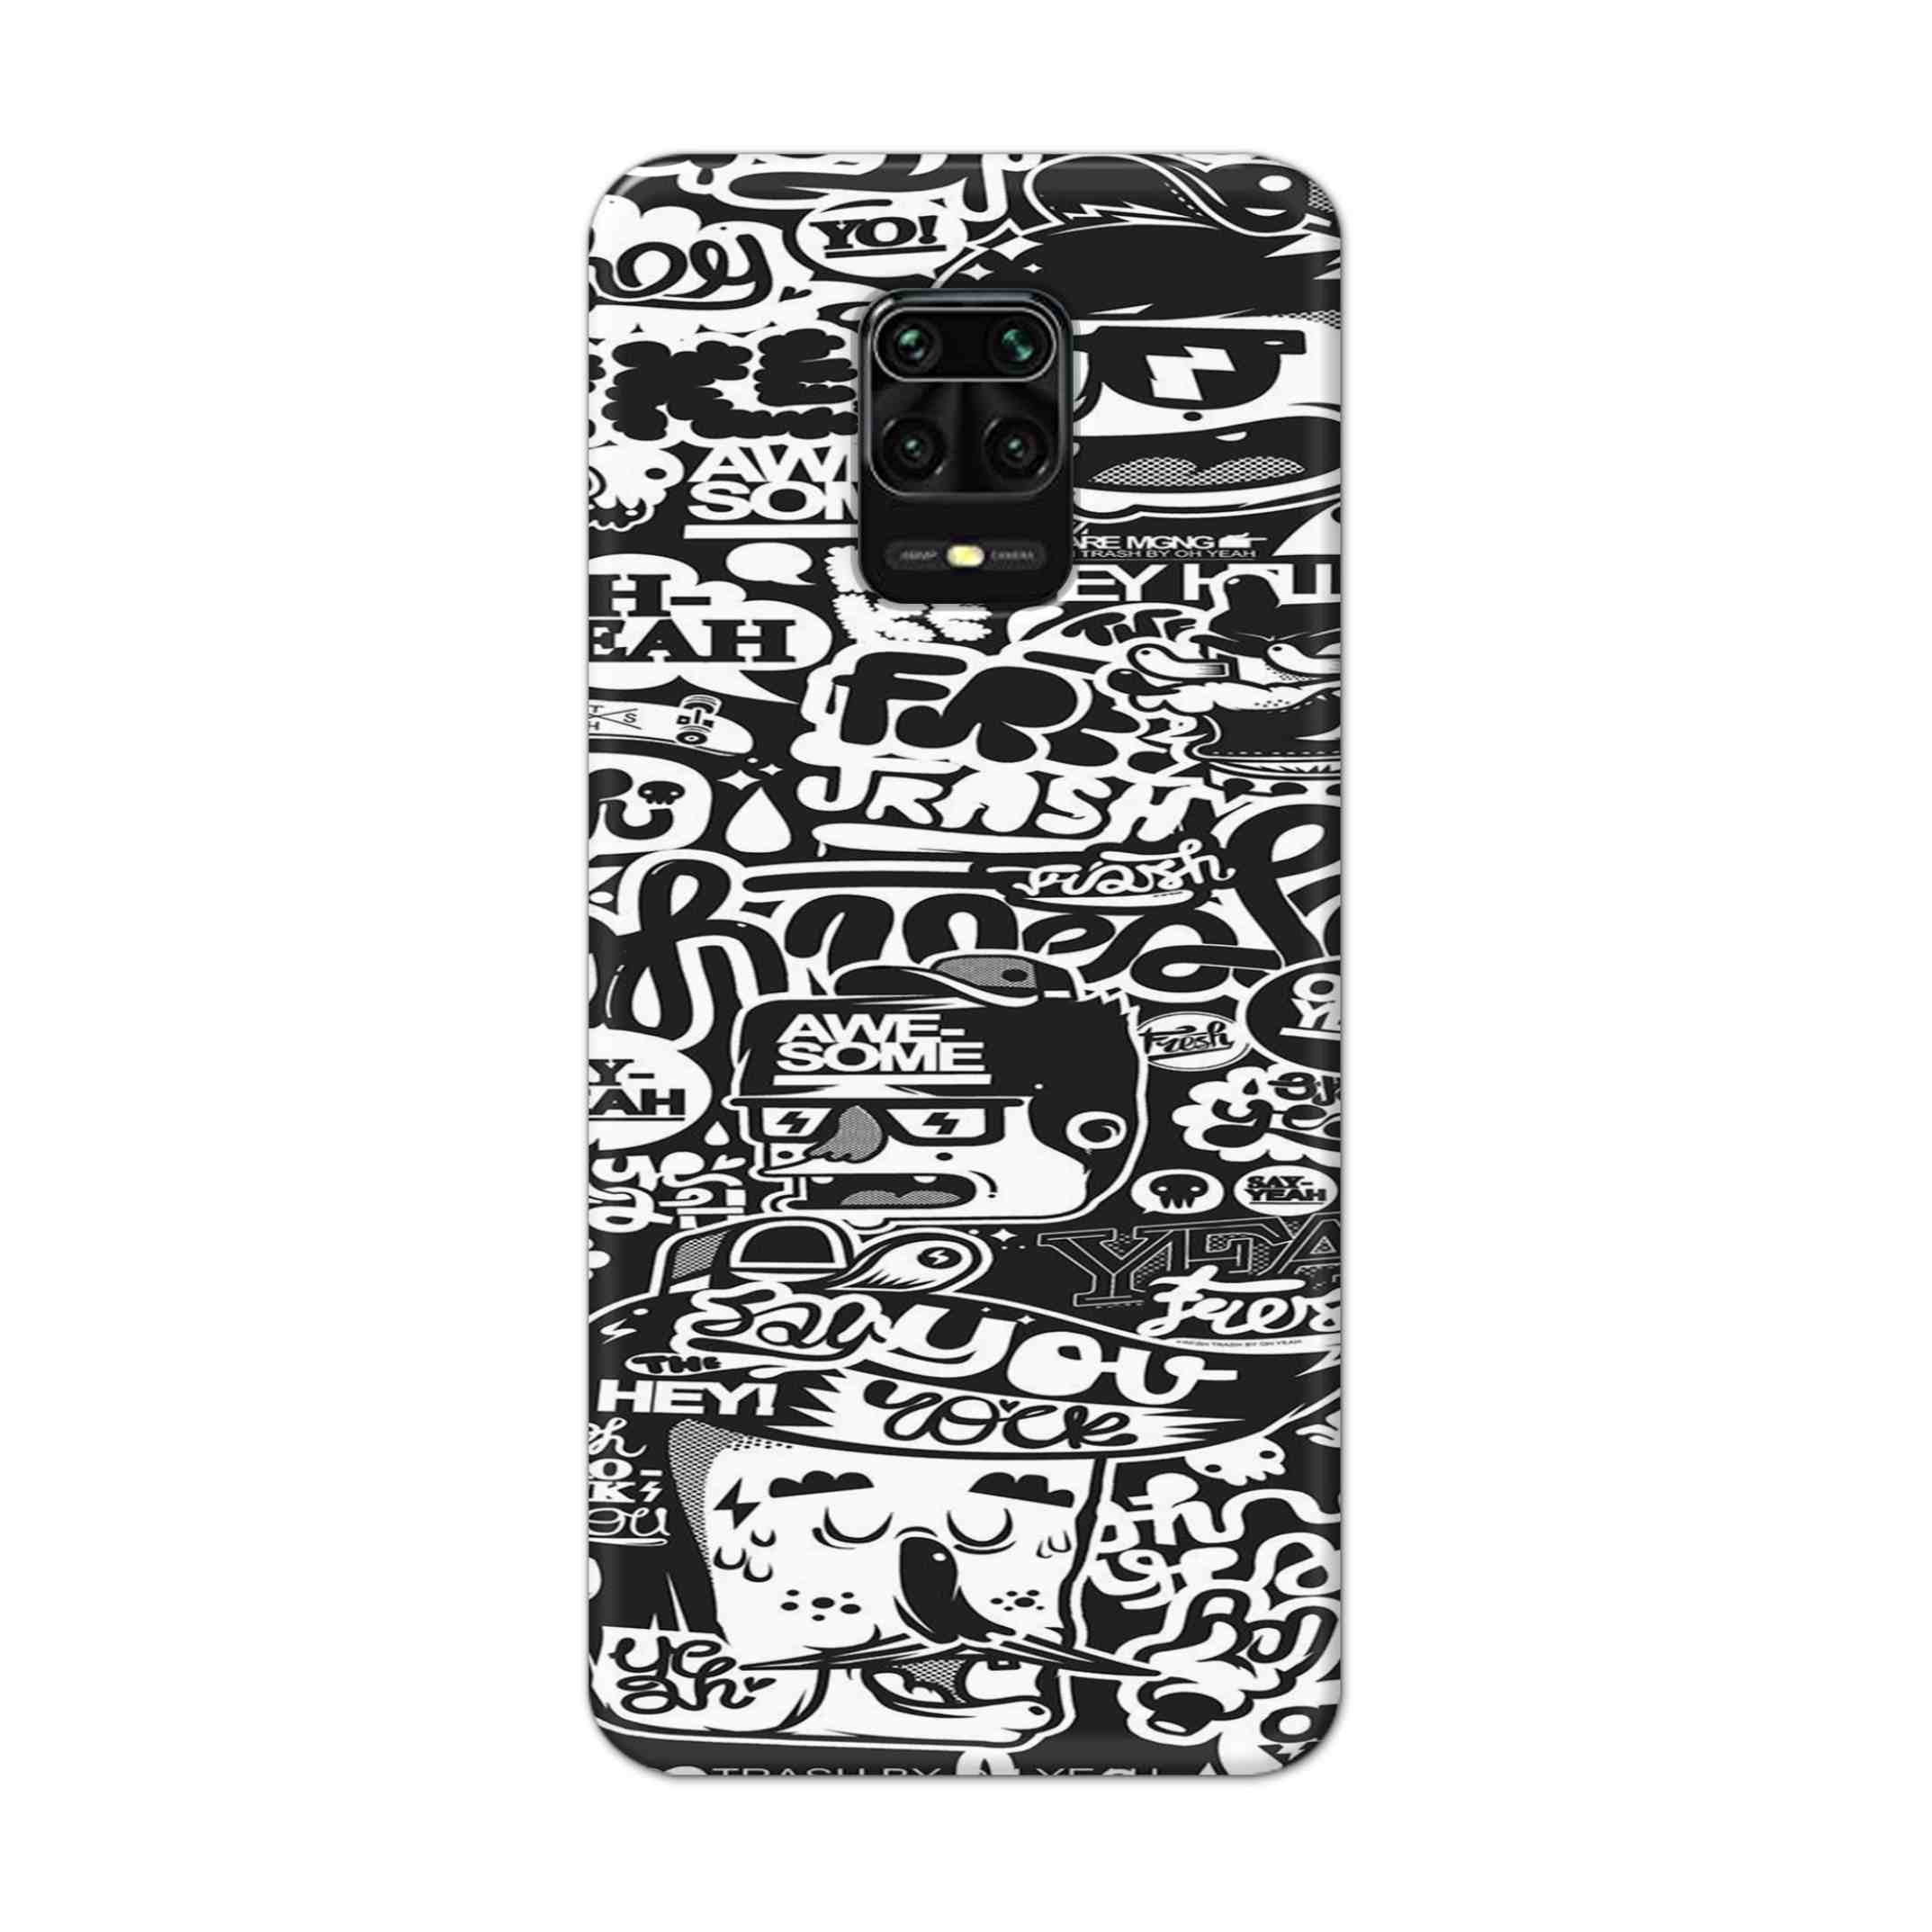 Buy Awesome Hard Back Mobile Phone Case Cover For Redmi Note 9 Pro Online